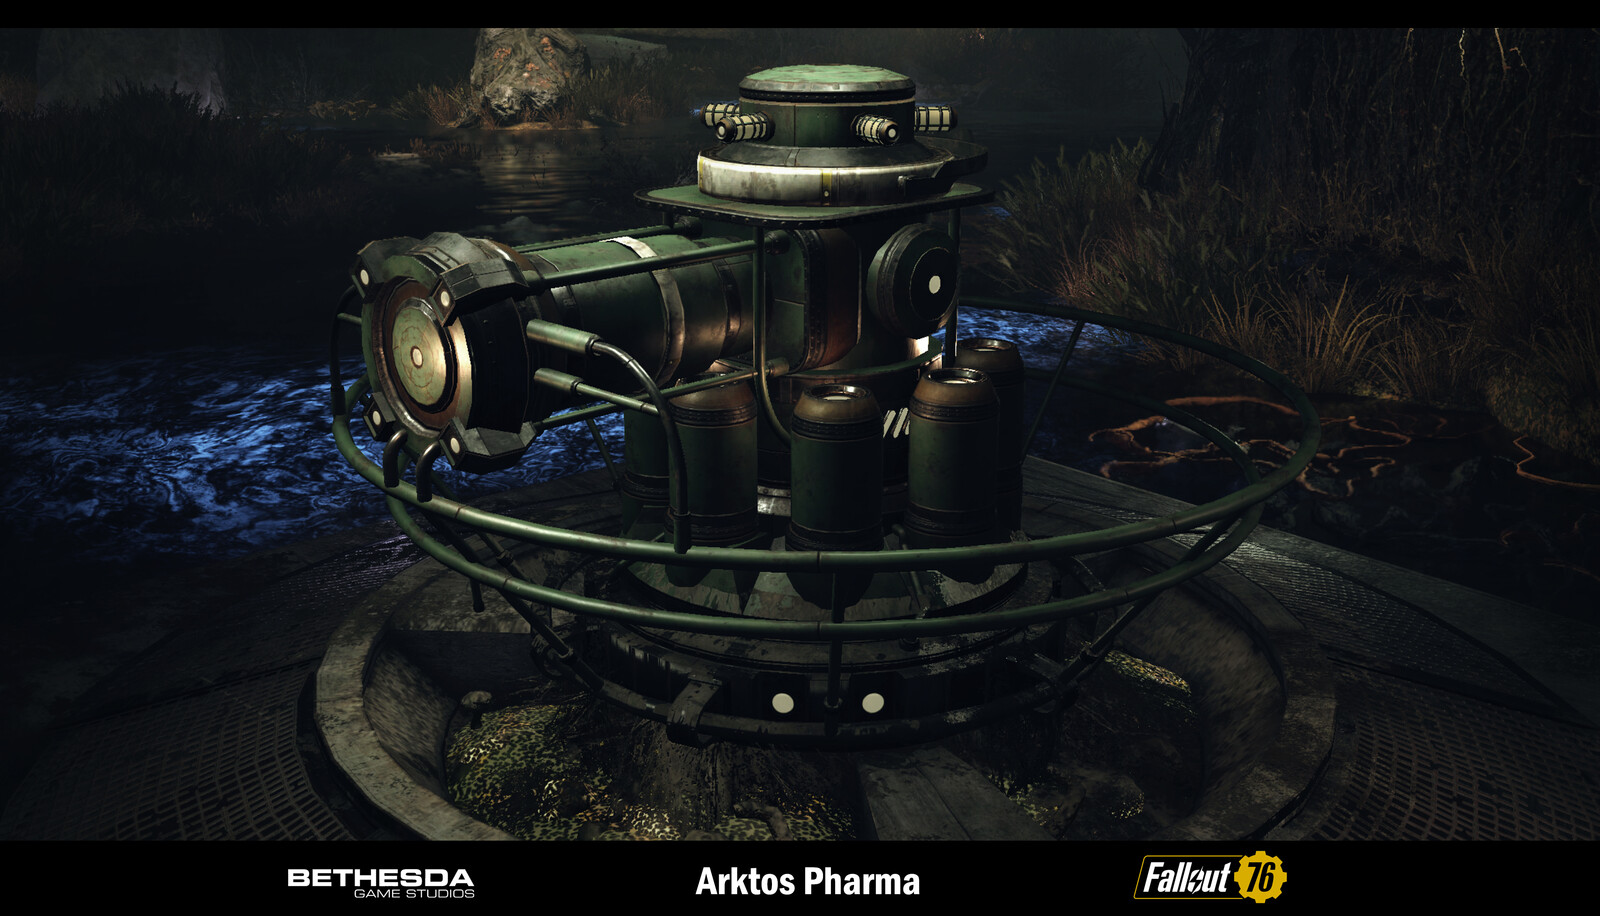 Arktos ( Feeder Trough ).
Produced using Max, ZBrush, and Substance Painter.